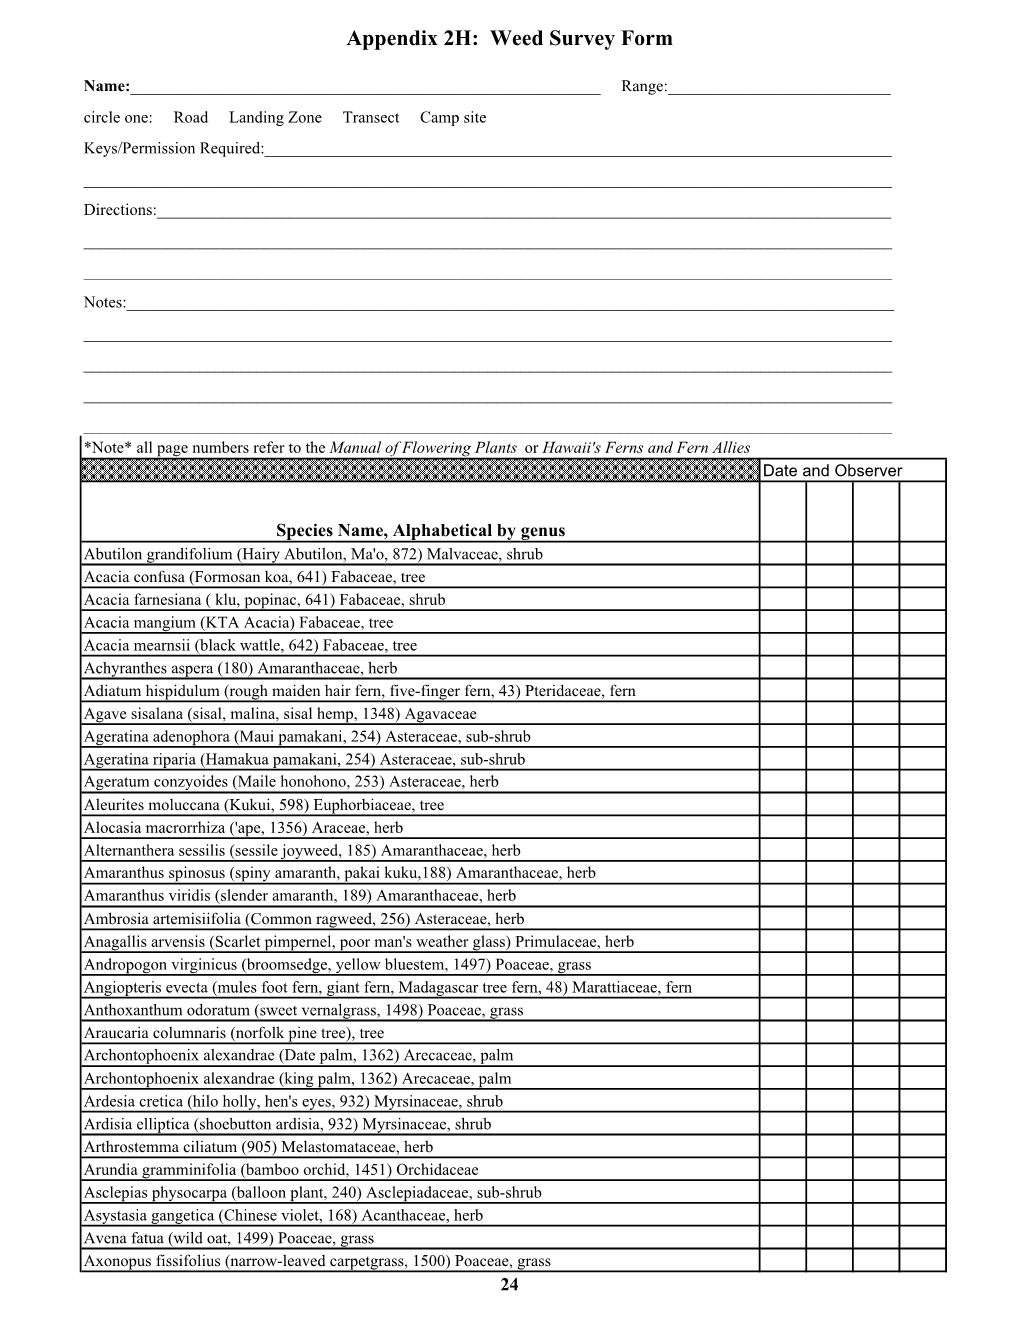 07 2A Weed Survey Form